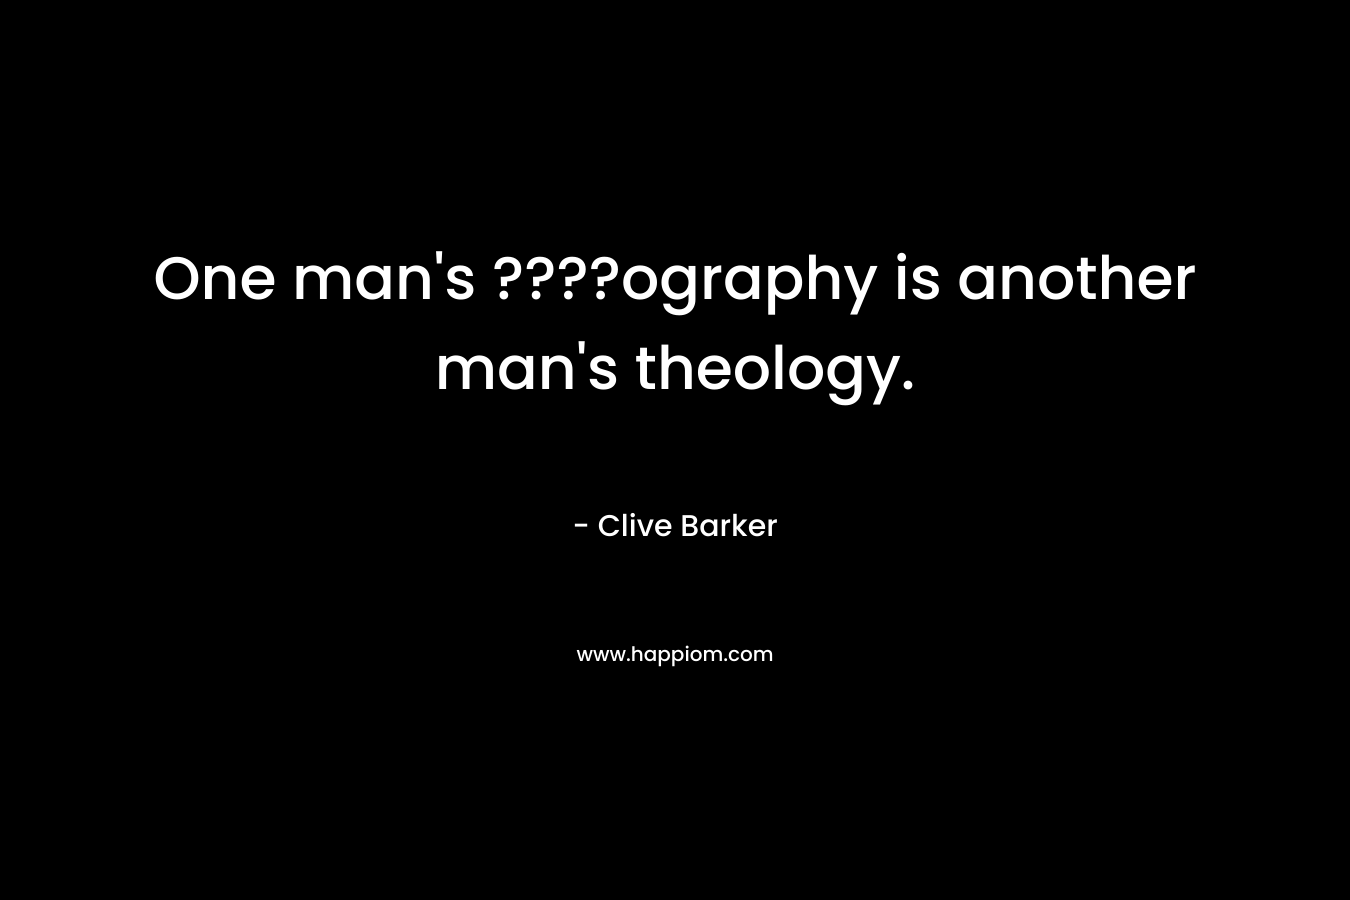 One man’s ????ography is another man’s theology. – Clive Barker